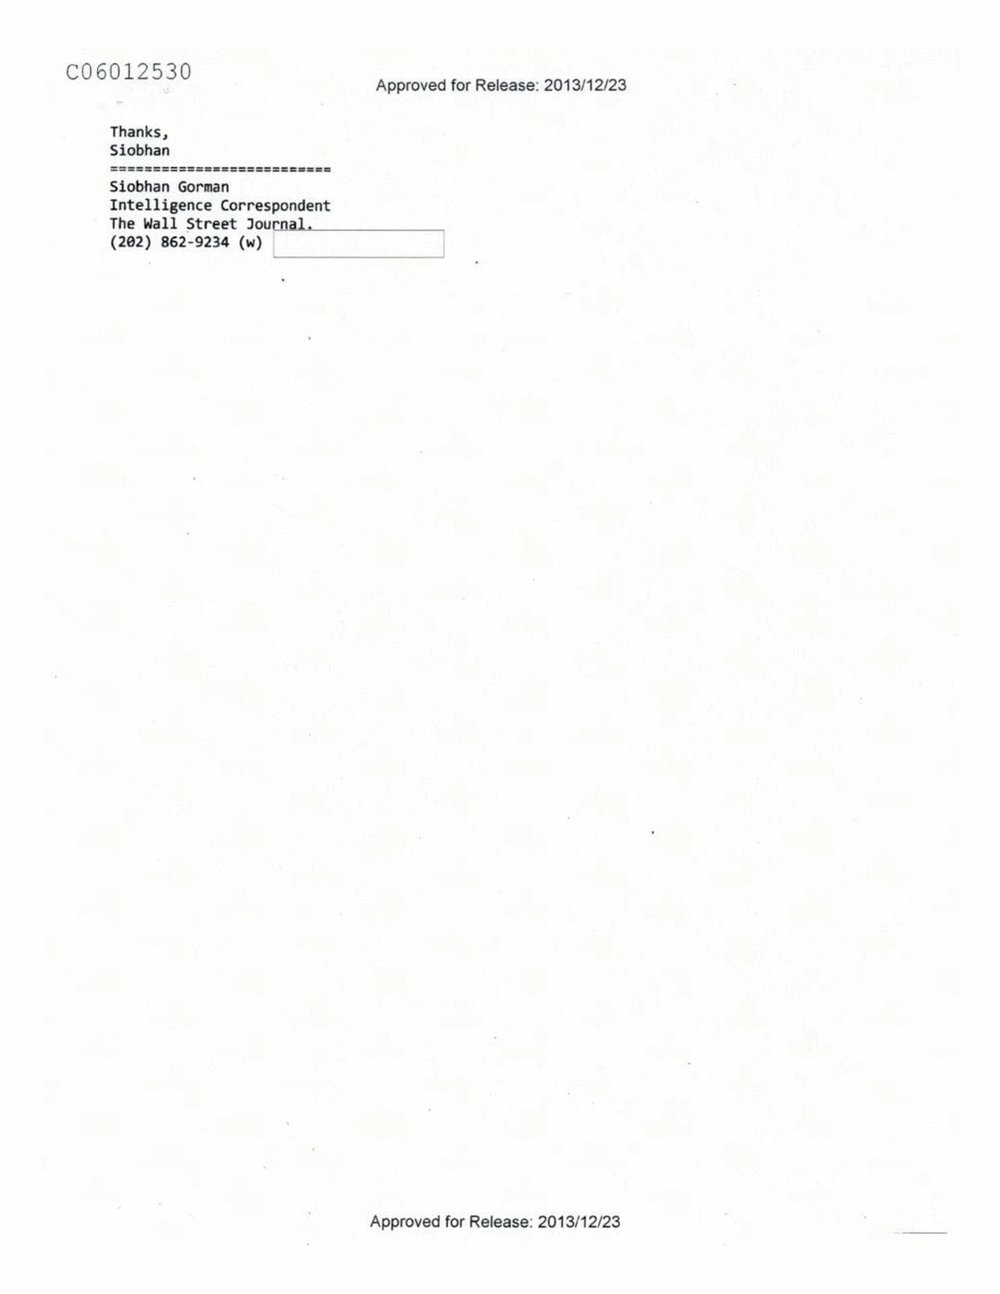 Page 60 from Email Correspondence Between Reporters and CIA Flacks